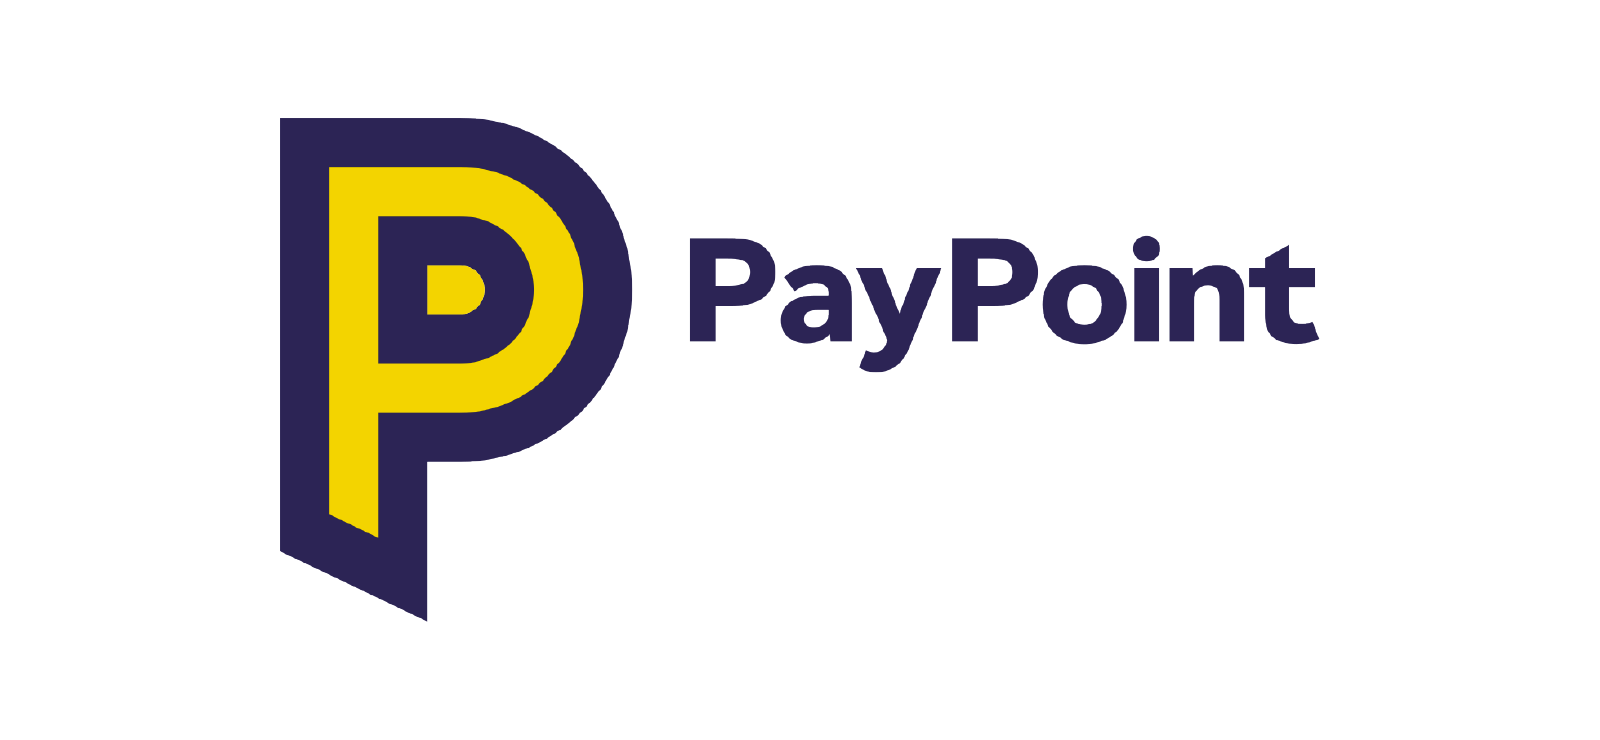 PayPoint Simplifies PCI DSS Compliance and Overcomes Shortage of ...